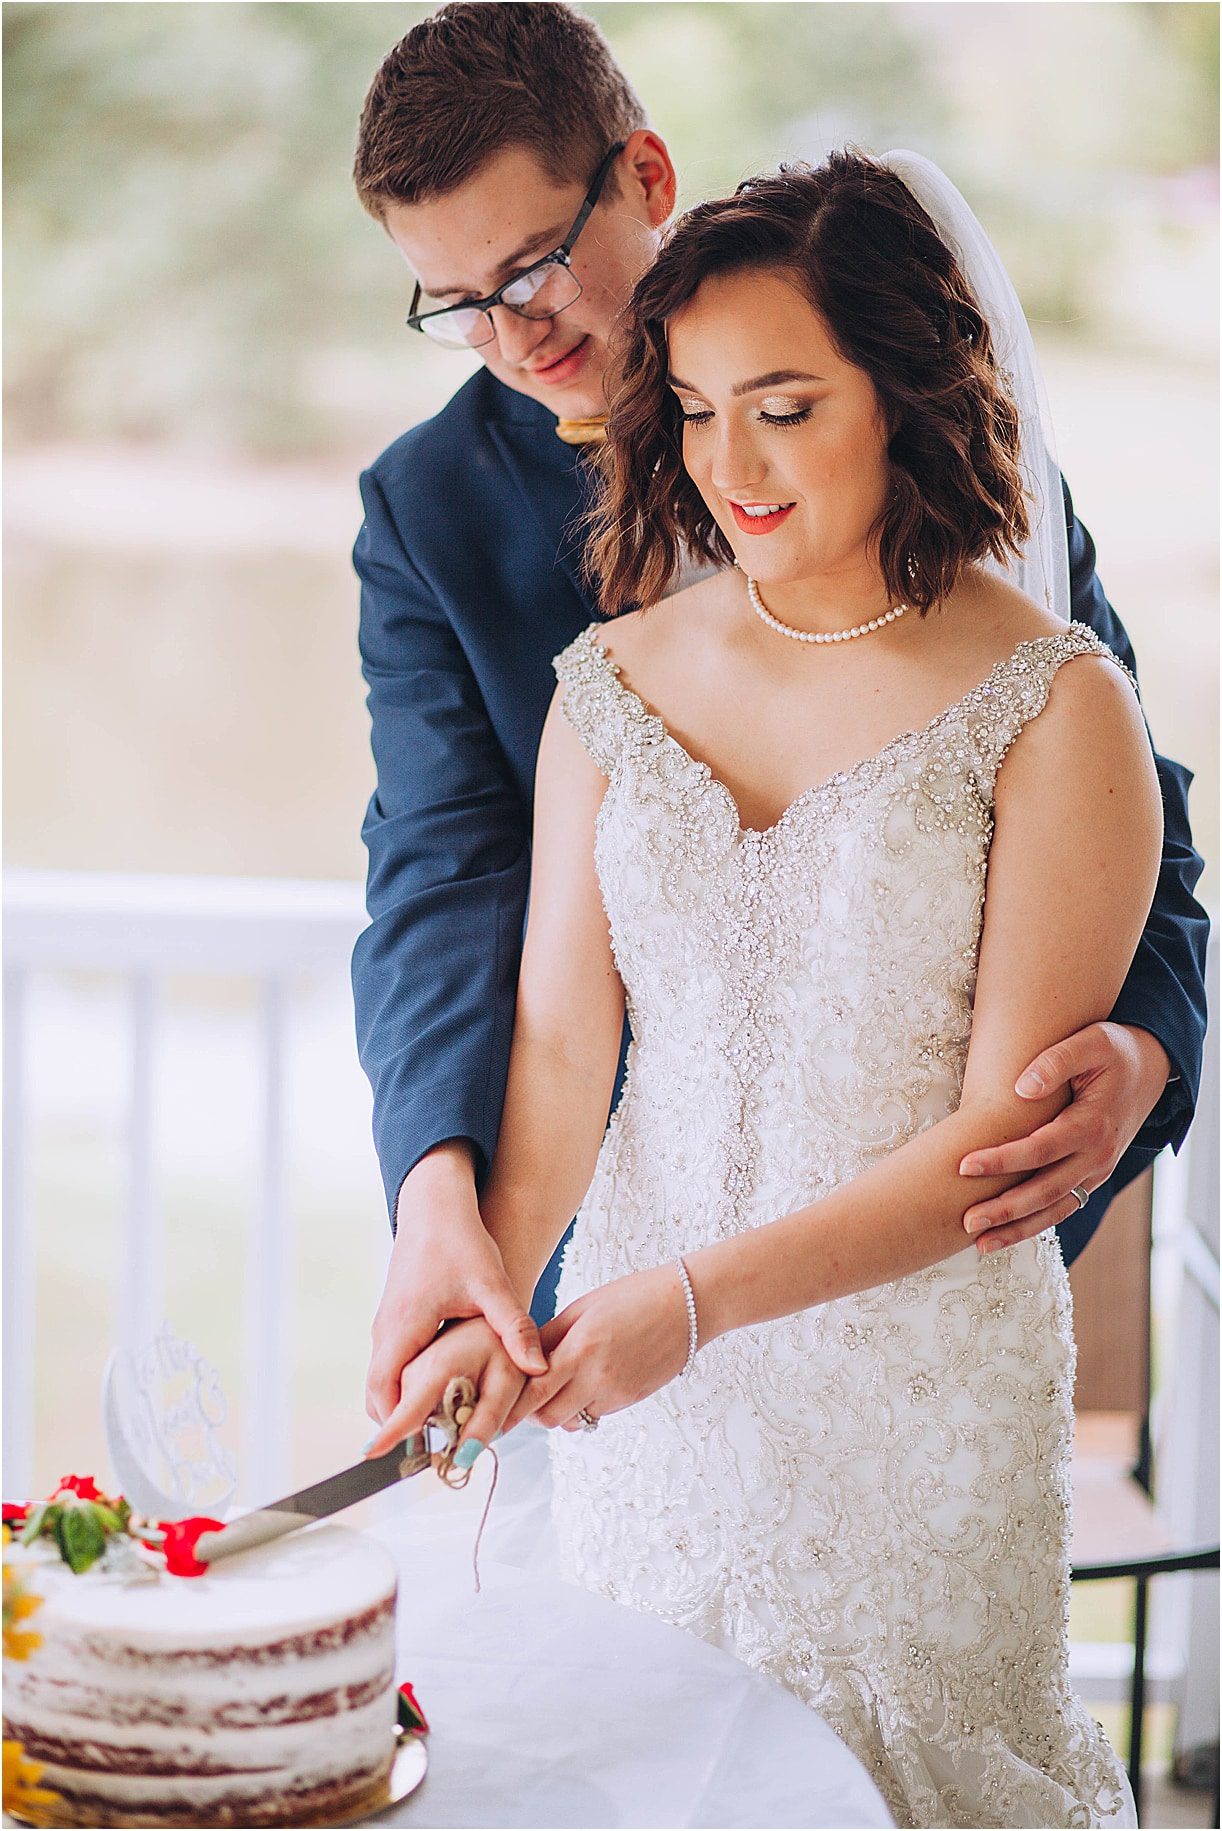 Intimate Ceremony During Covid-19 | Hill City Bride Virginia Weddings Cake Cutting